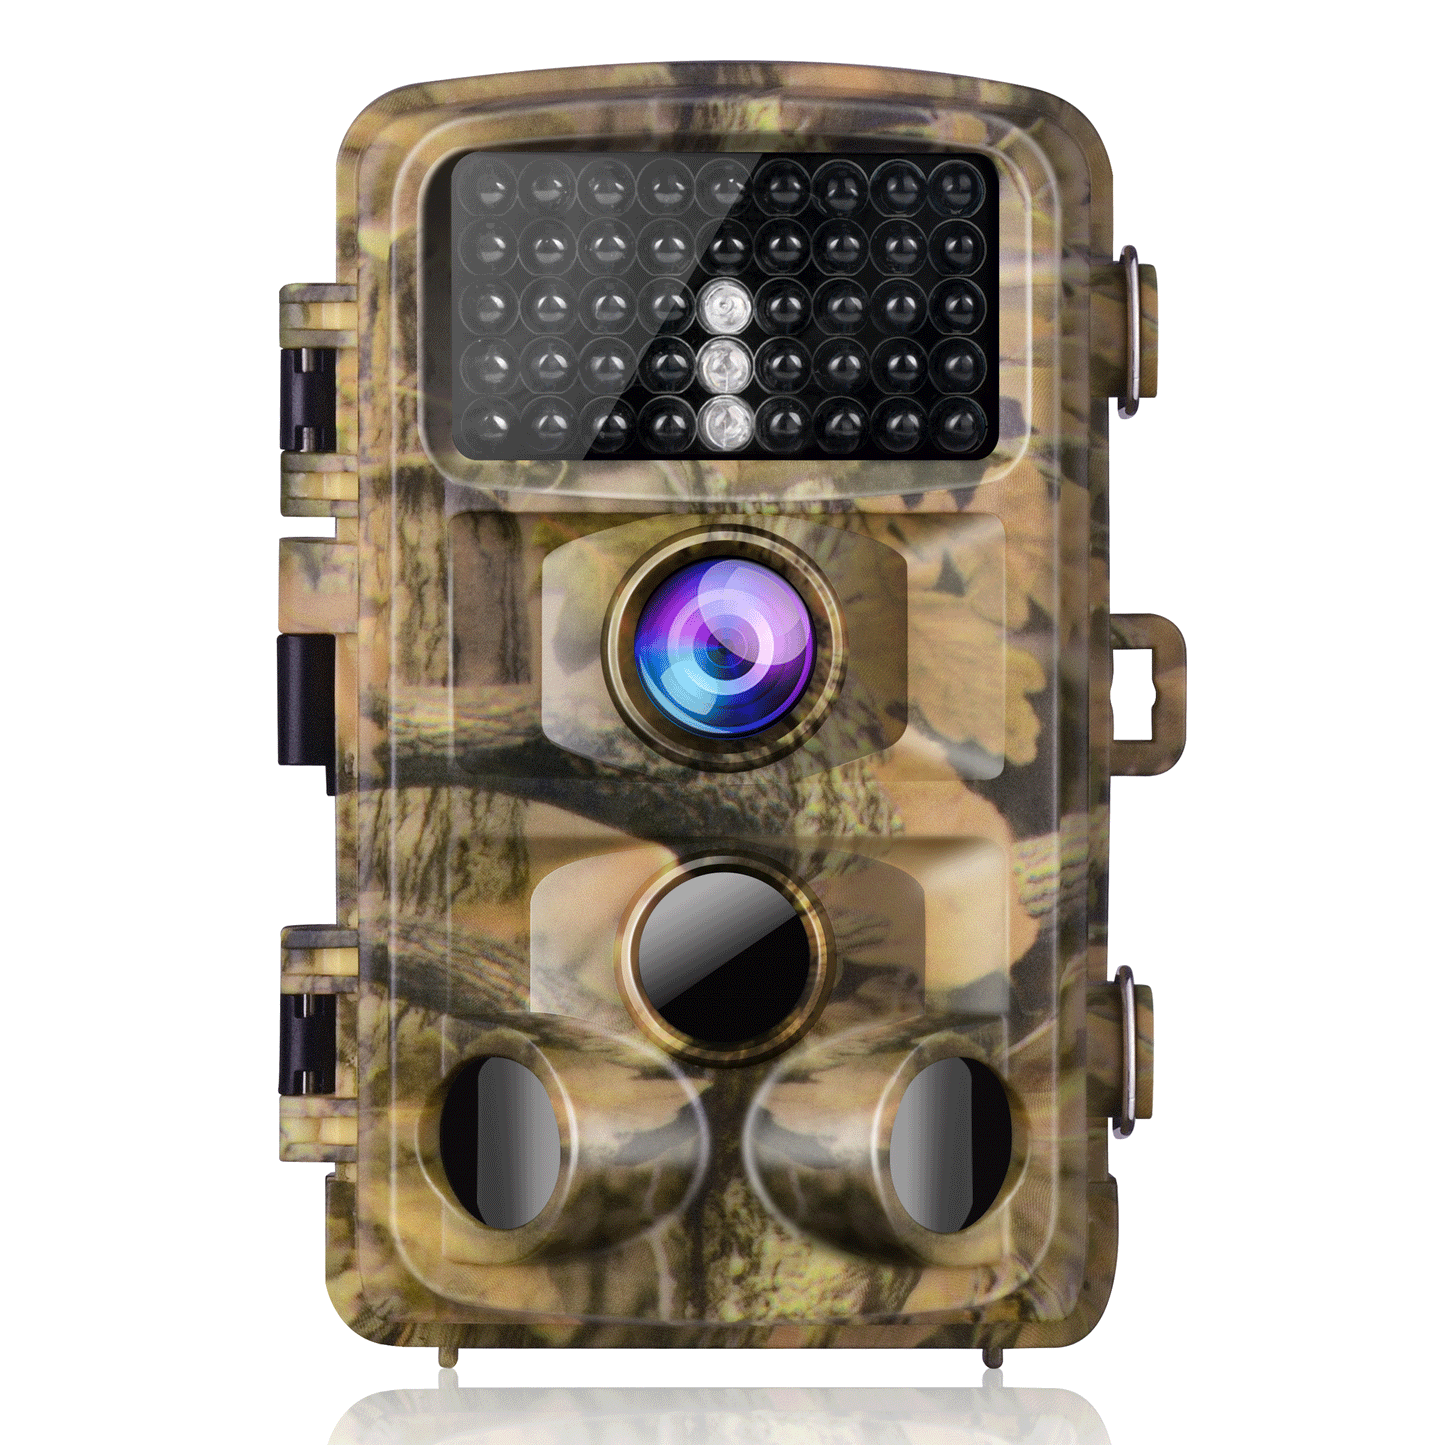 CAMPARK T45 Trail Camera 20MP 1080P Waterproof Deer Game Hunting Cam 2.4" LCD with 3 Infrared Sensors Motion Activated Night Vision for Wildlife Monitoring